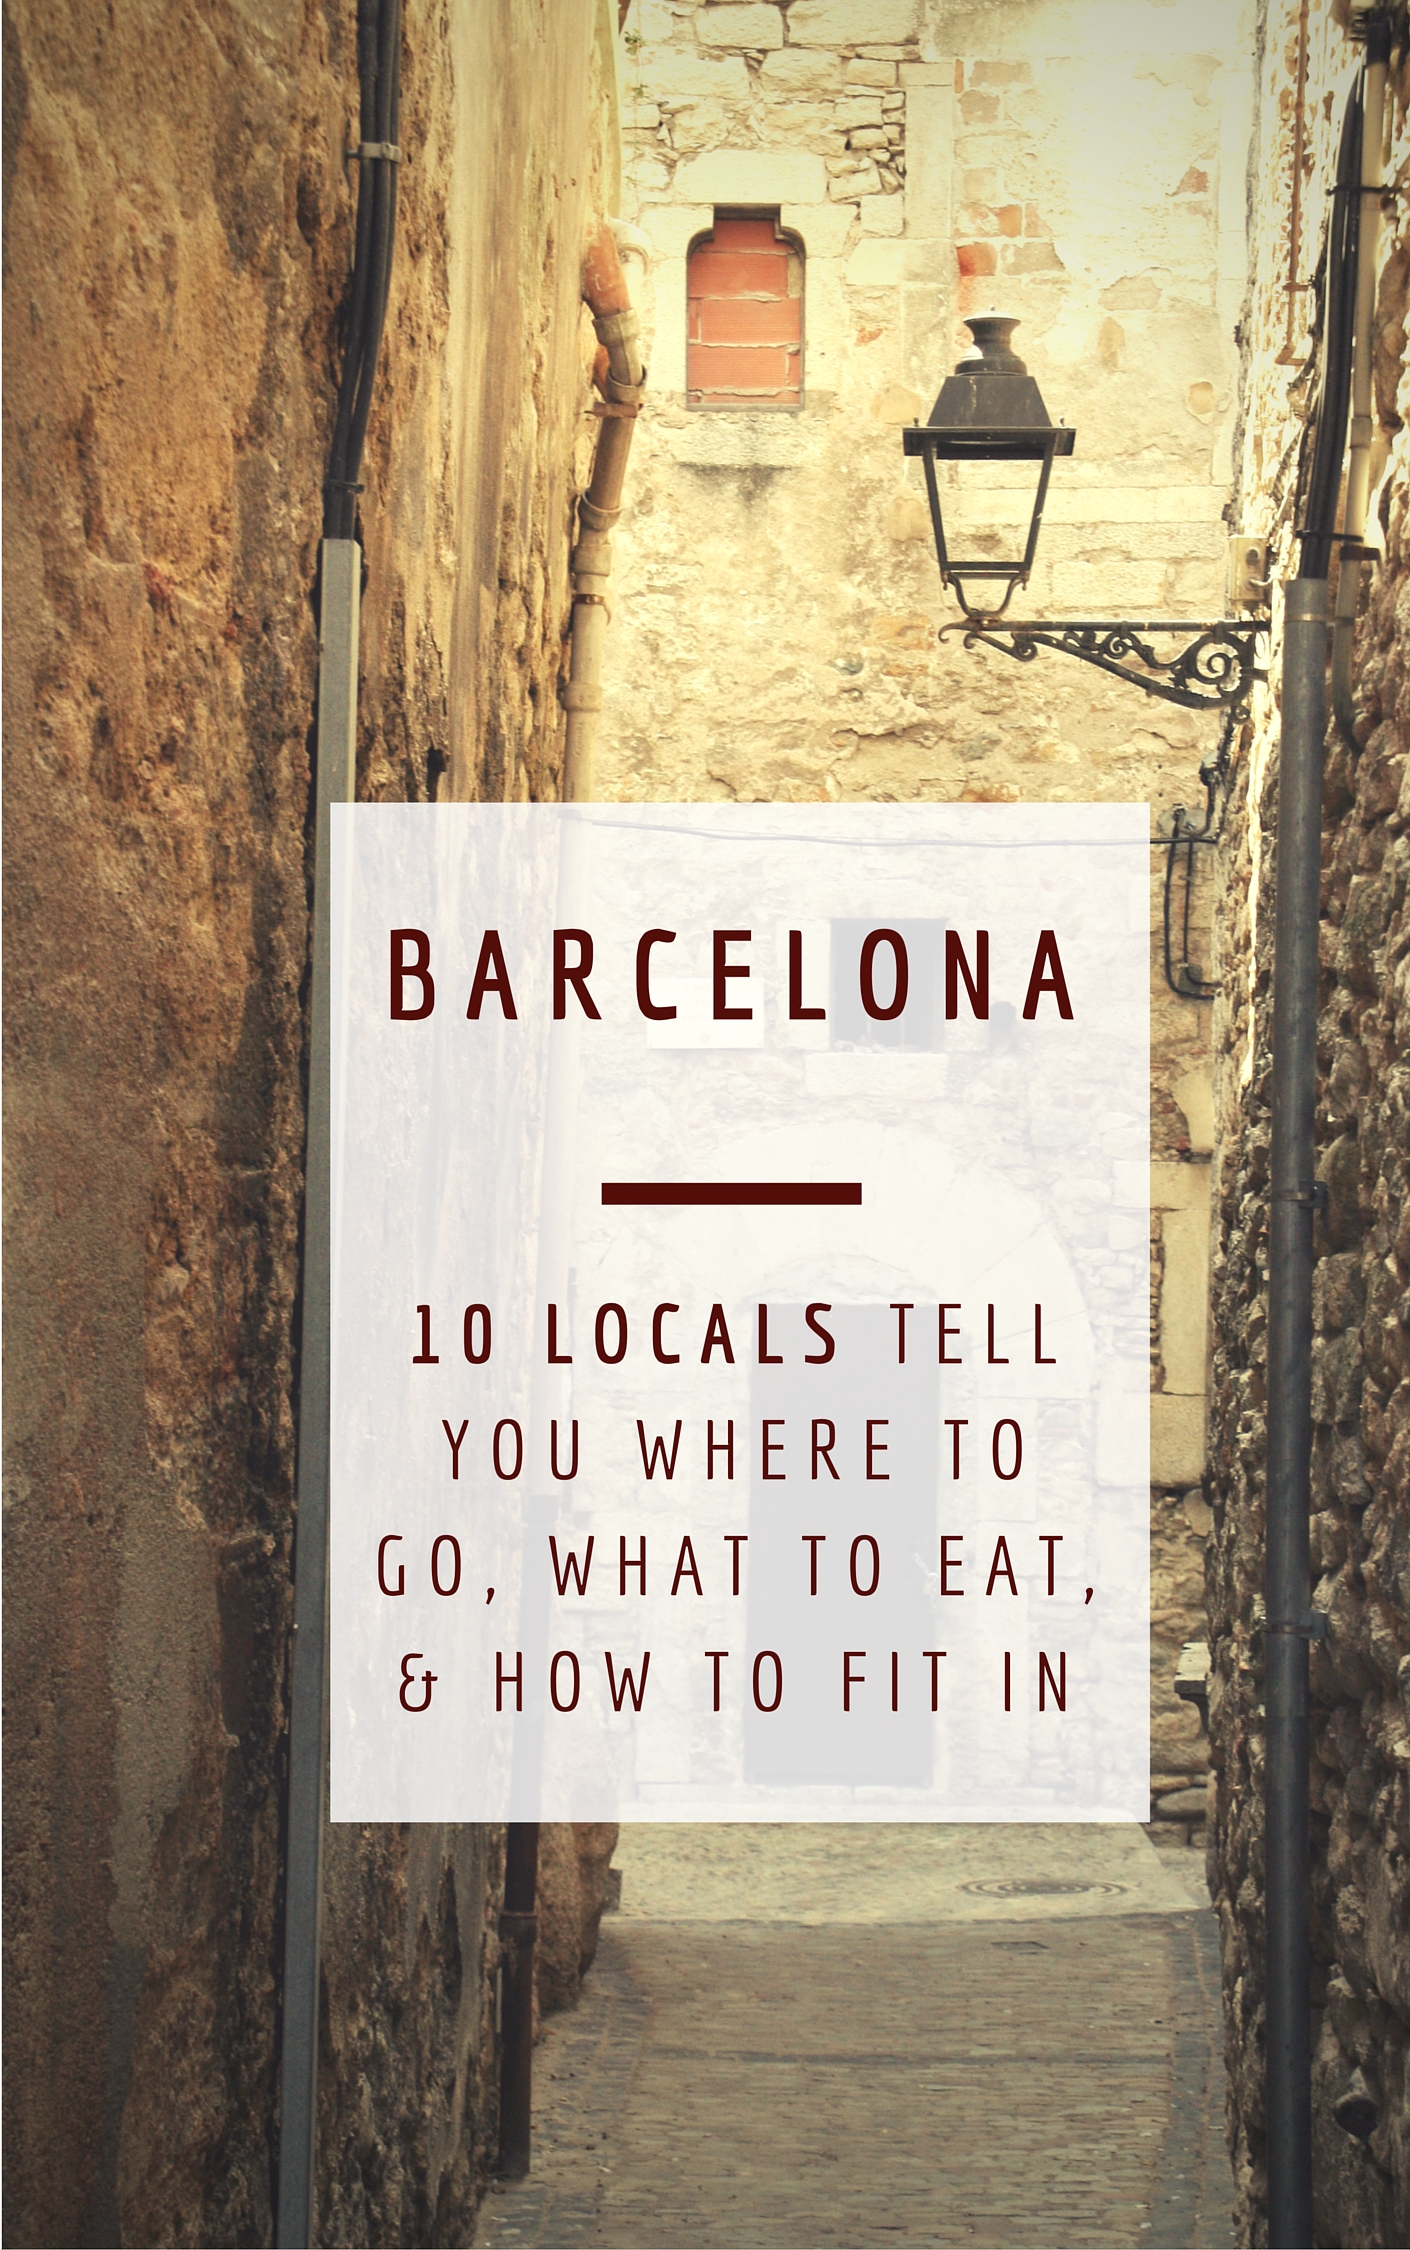 Barcelona - unconventional guides